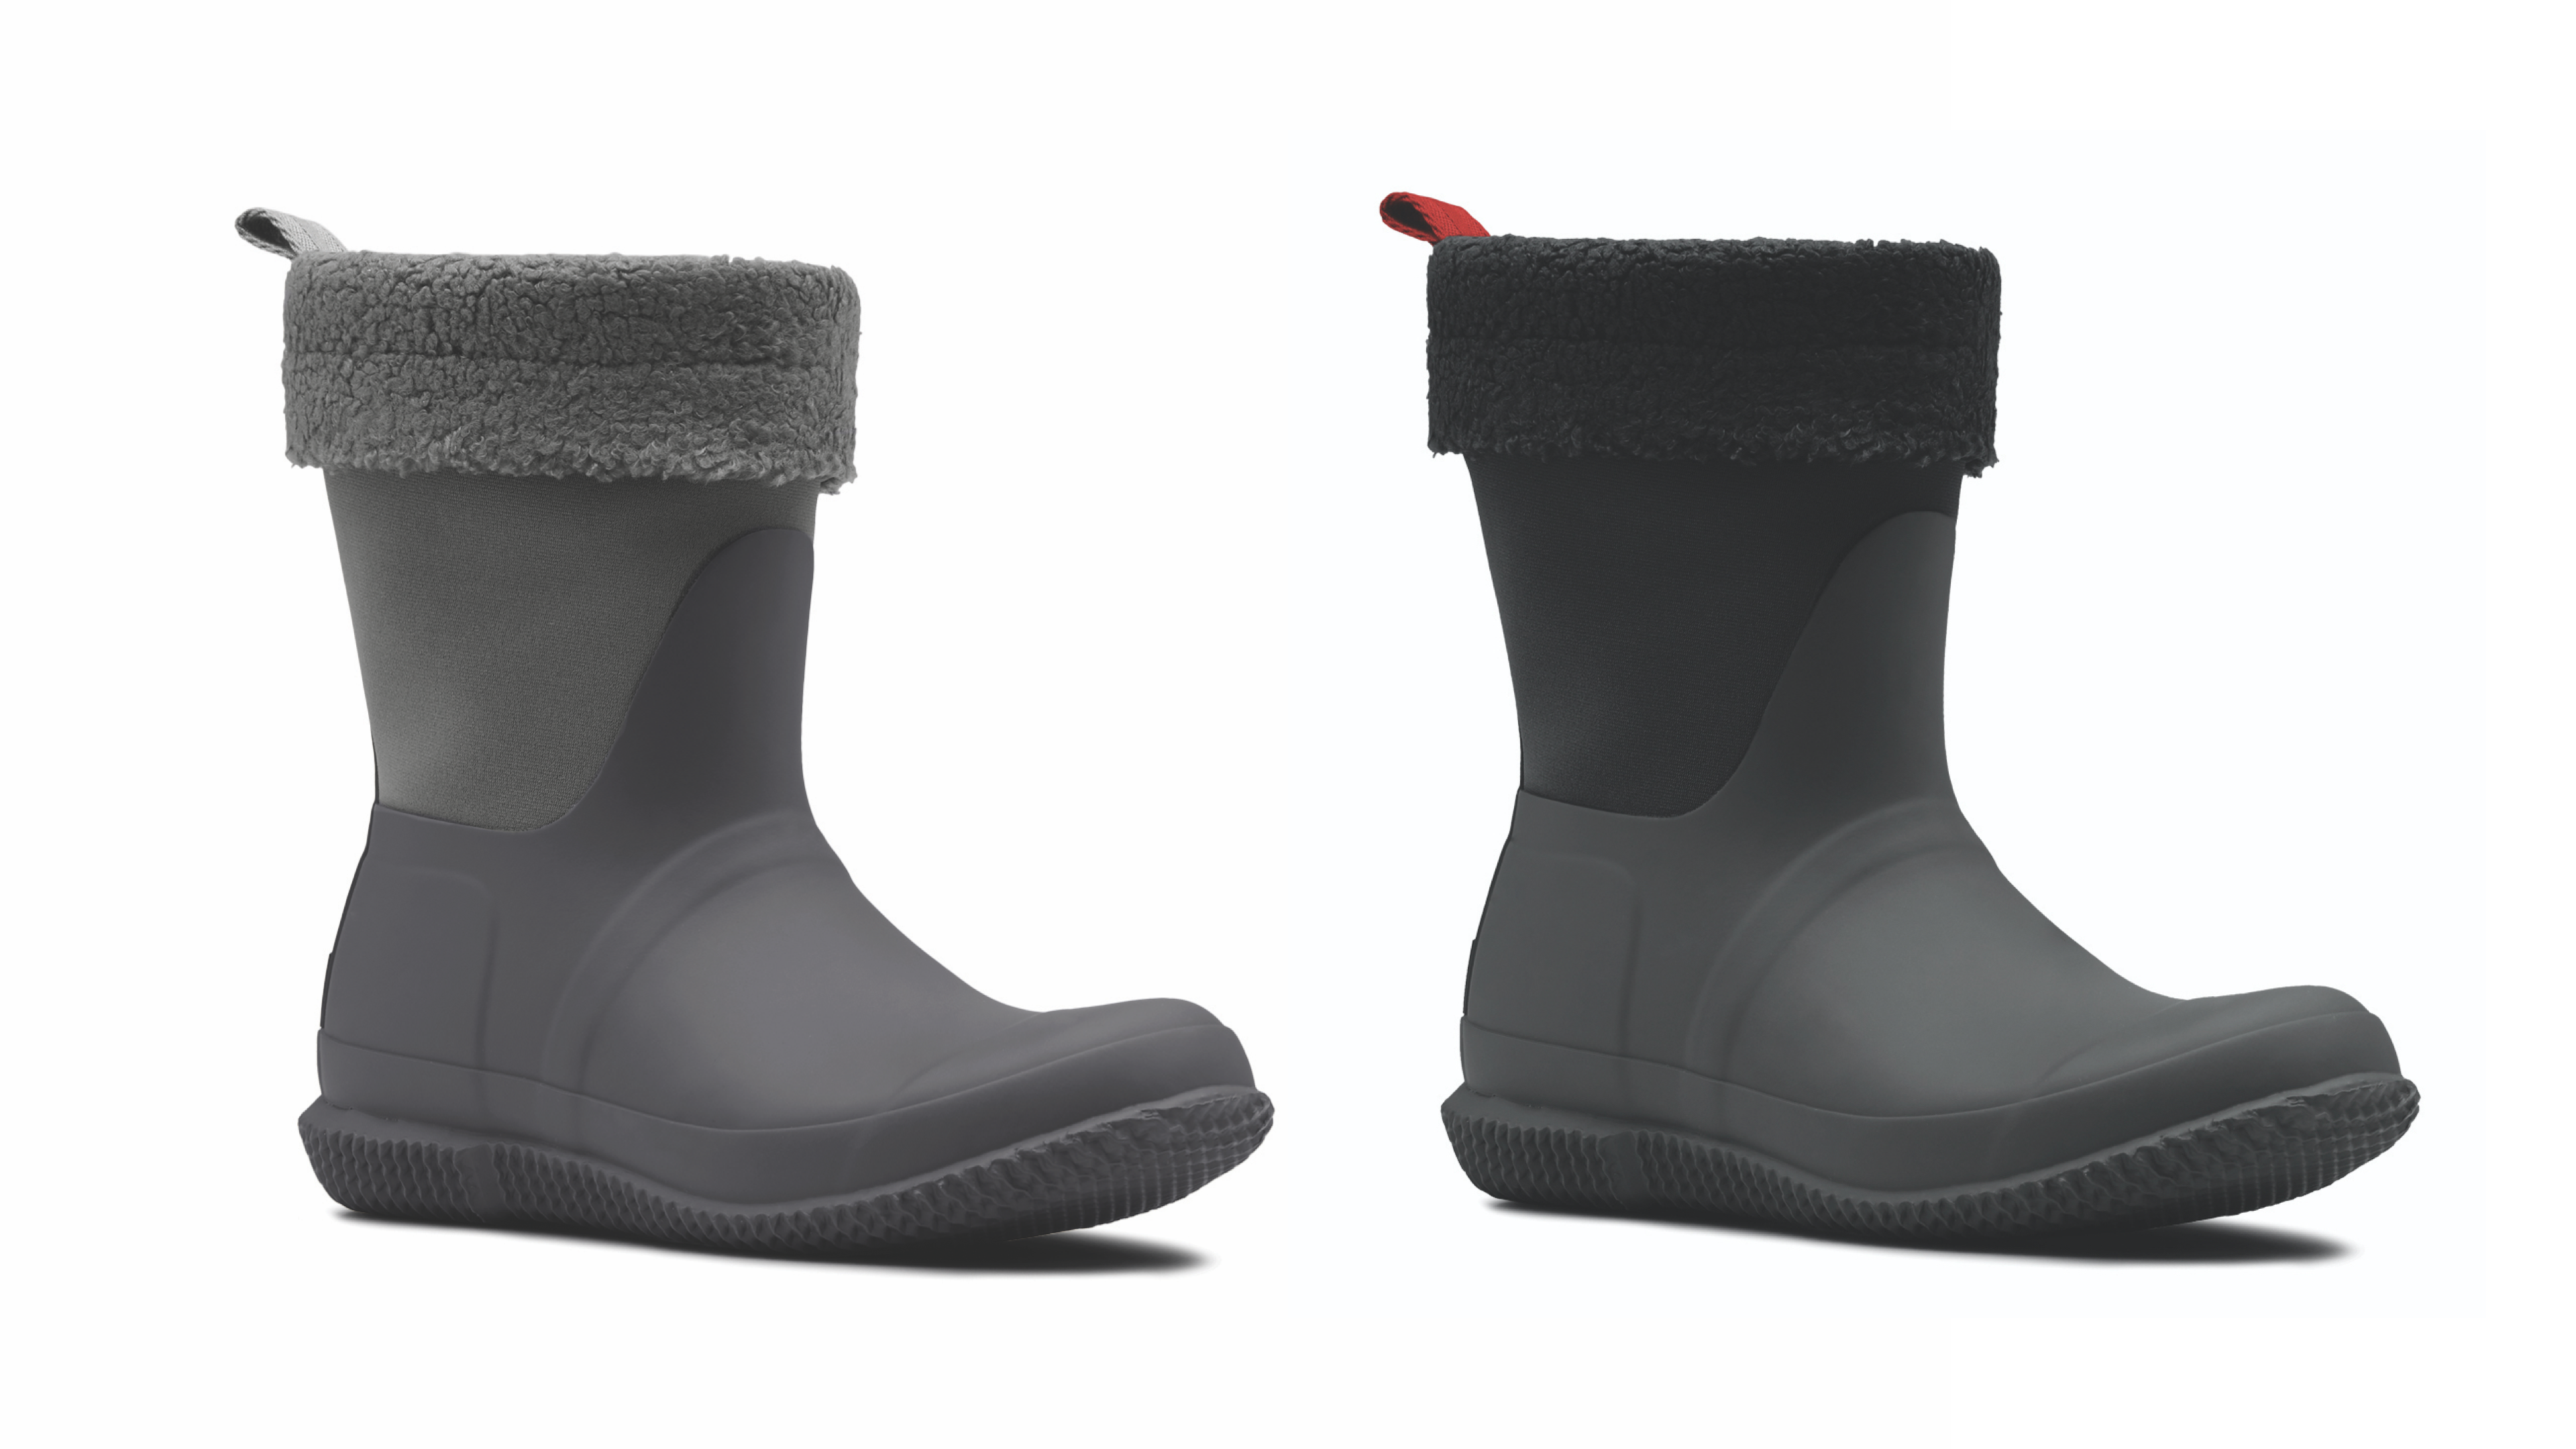 sherpa-lined snow and rain boots for cold weather